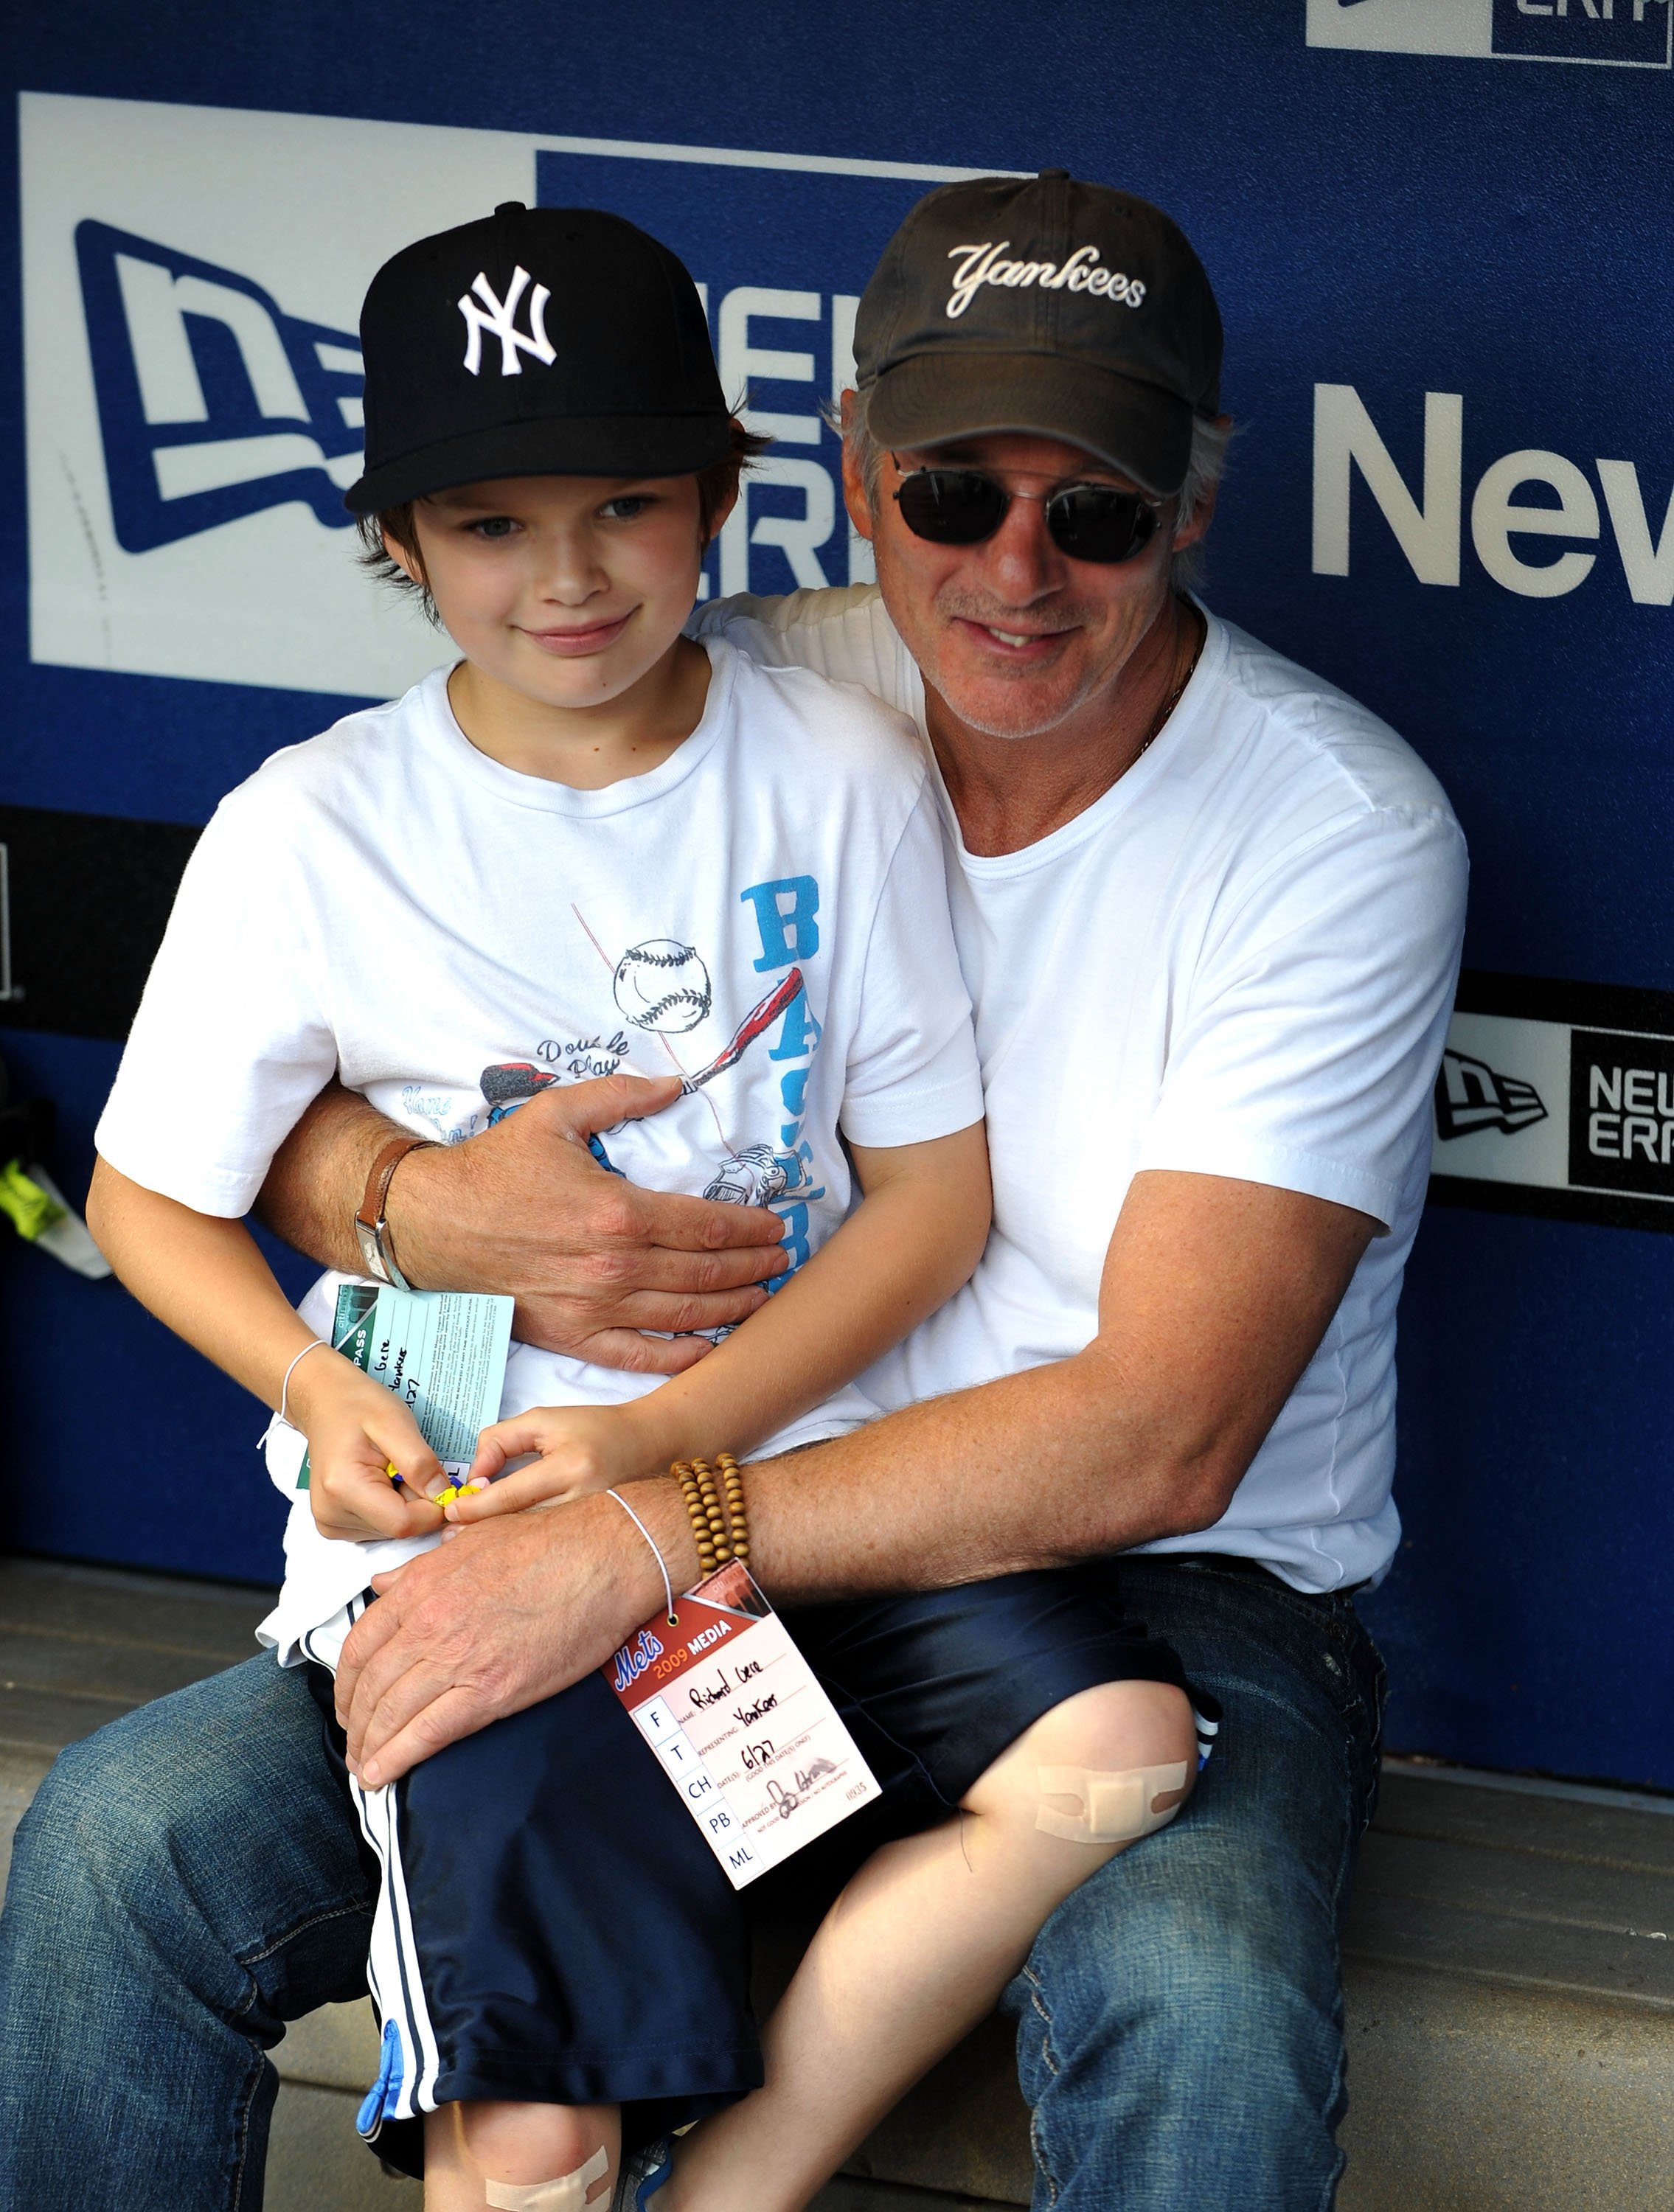 Richard Gere and his son Homer attend the New York Subway Series game between the Mets and Yannkees at Citi Field on June 26, 2009 in New York, New York | Source: Getty Images 